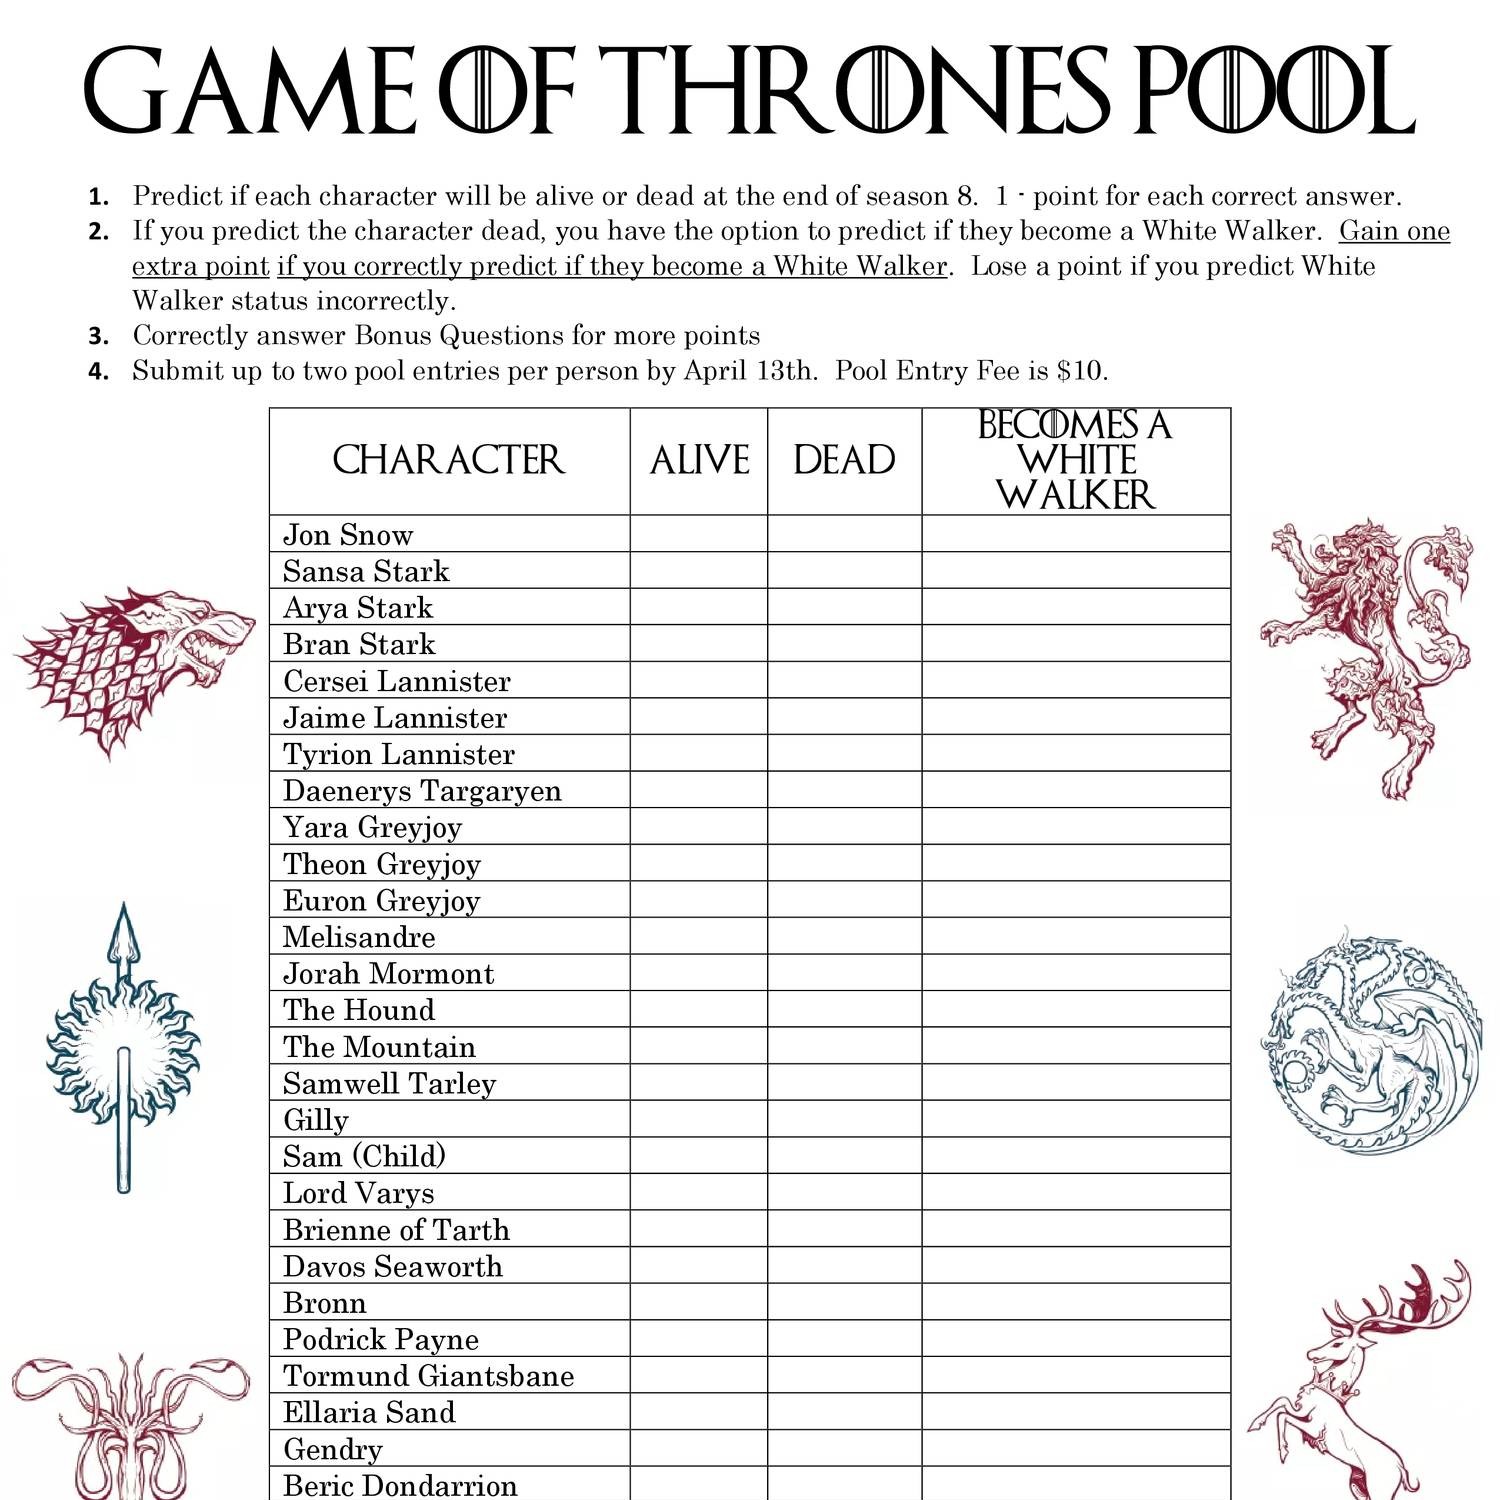 Game Of Thrones Pool Pdf Docdroid